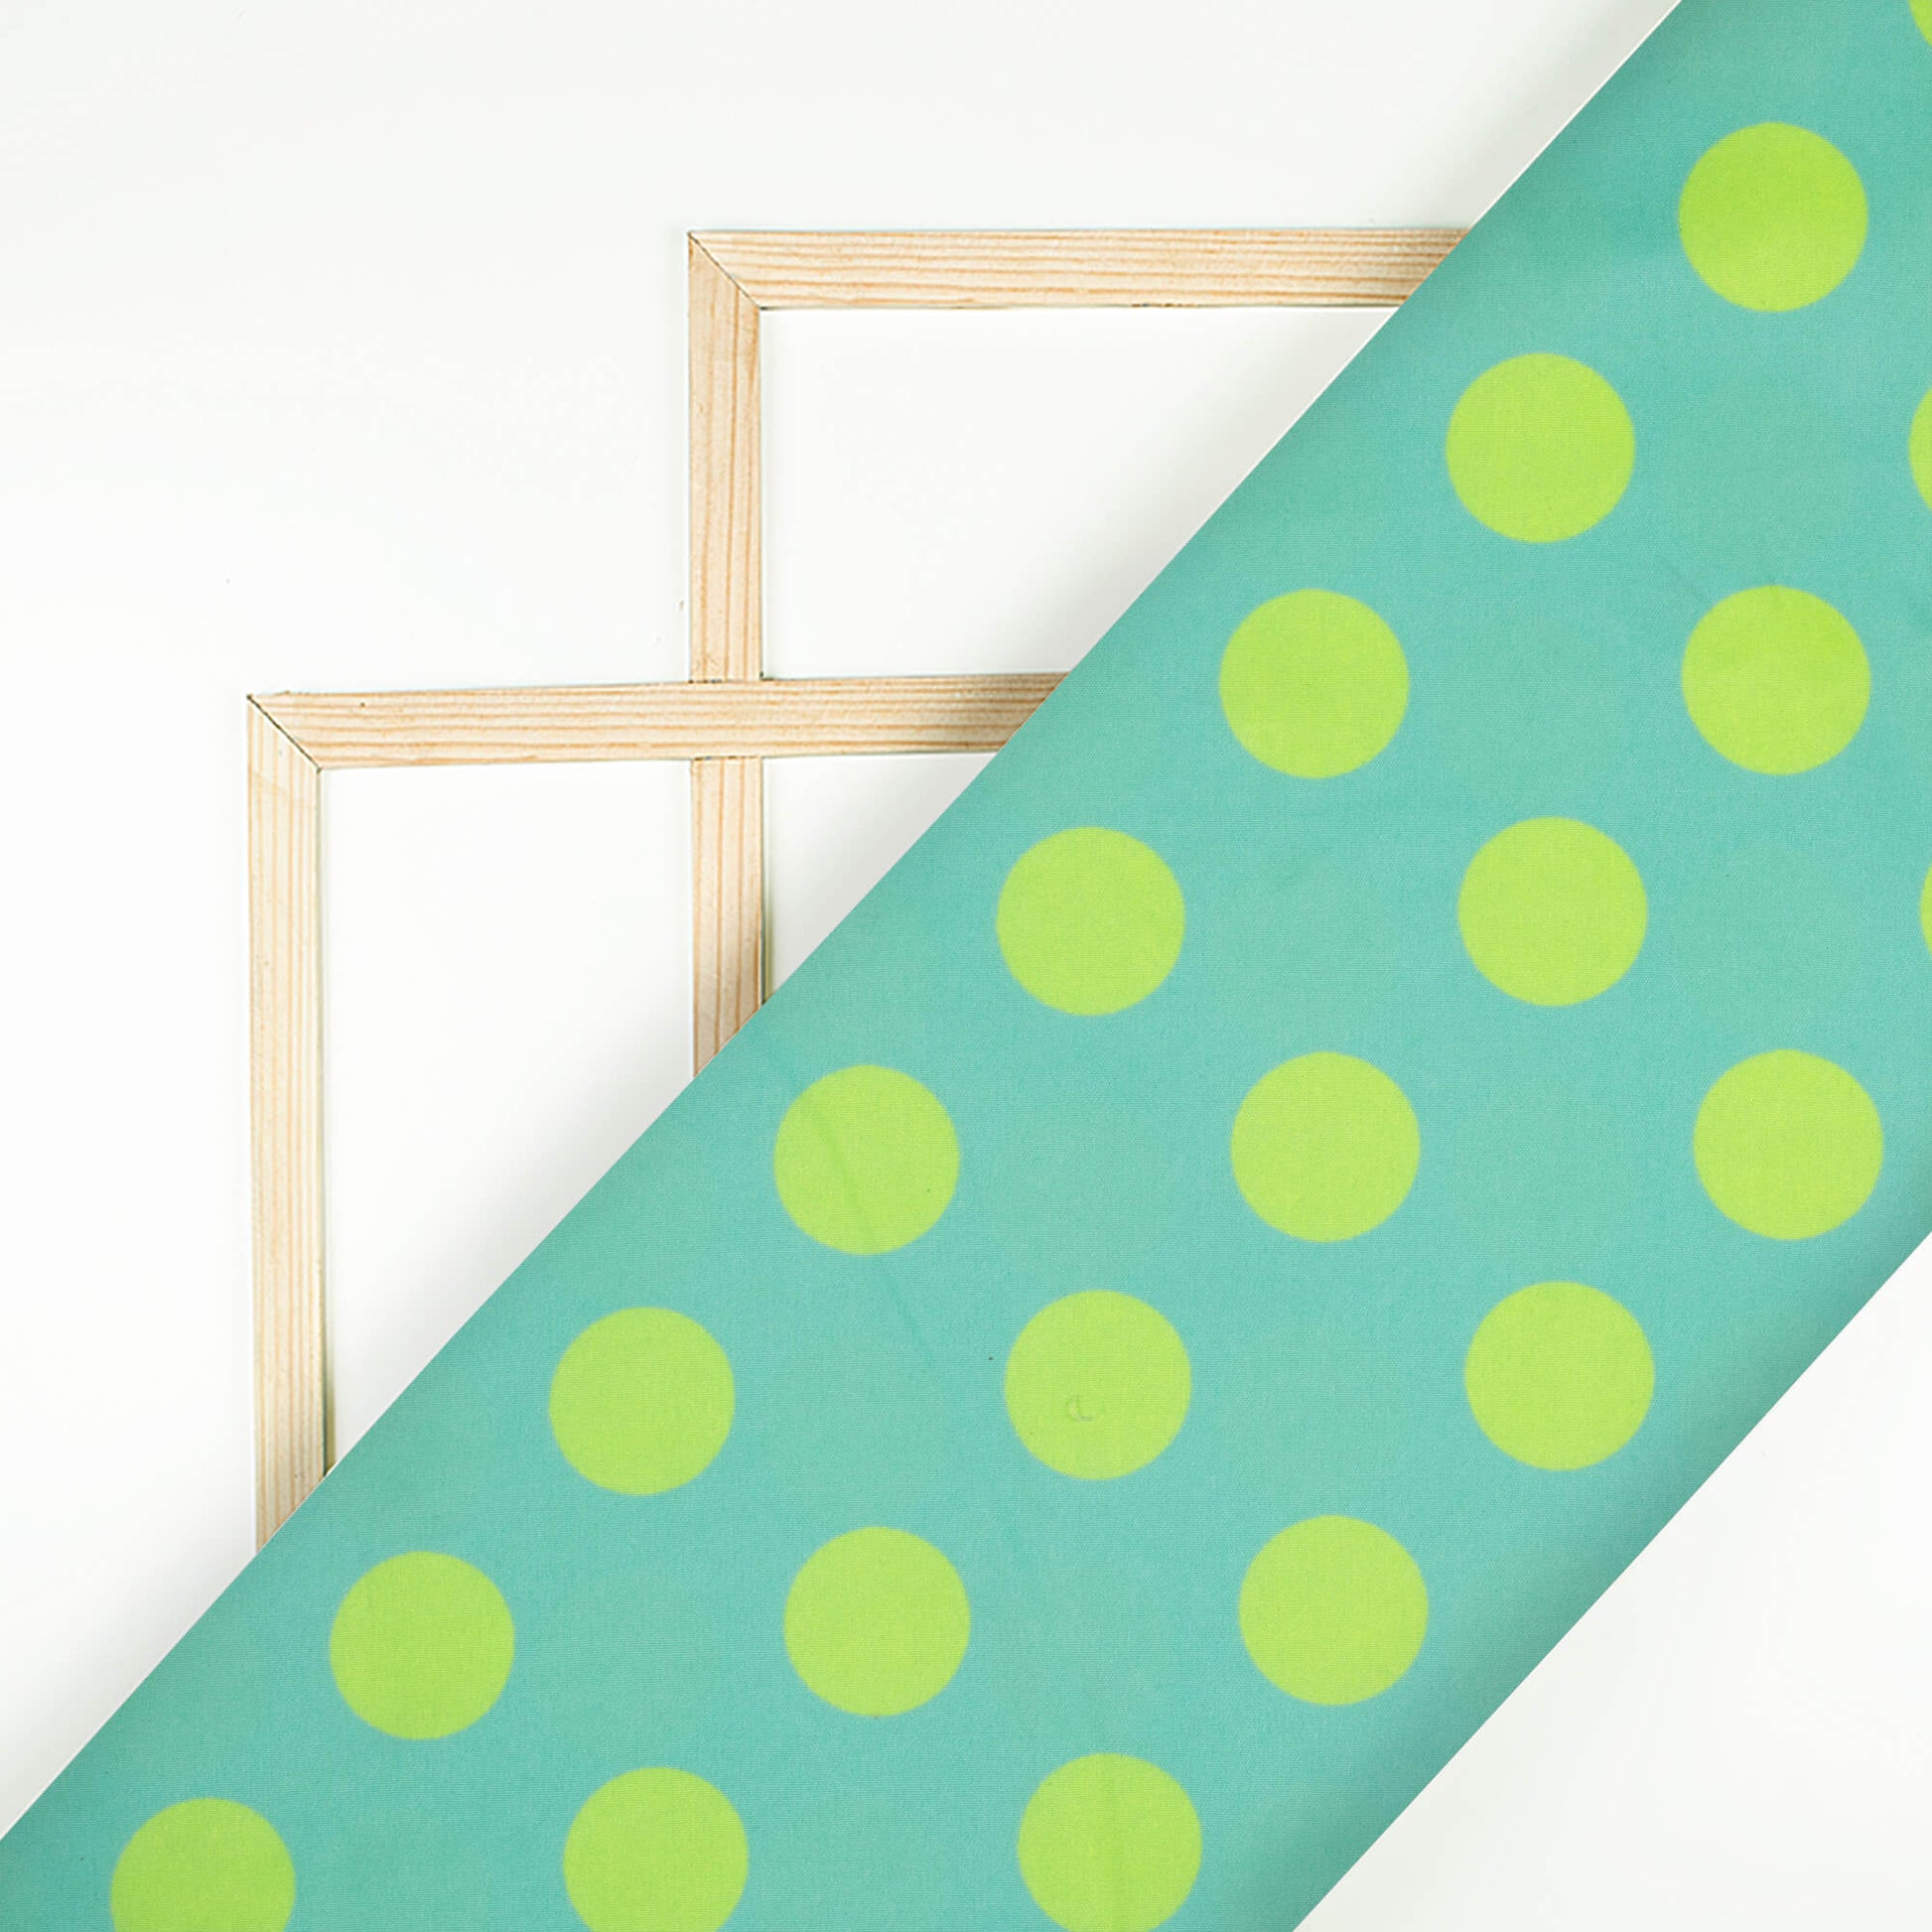 Tiffany Blue And Liril Green Polka Dots Pattern Digital Print Ultra Premium Butter Crepe Fabric - Fabcurate